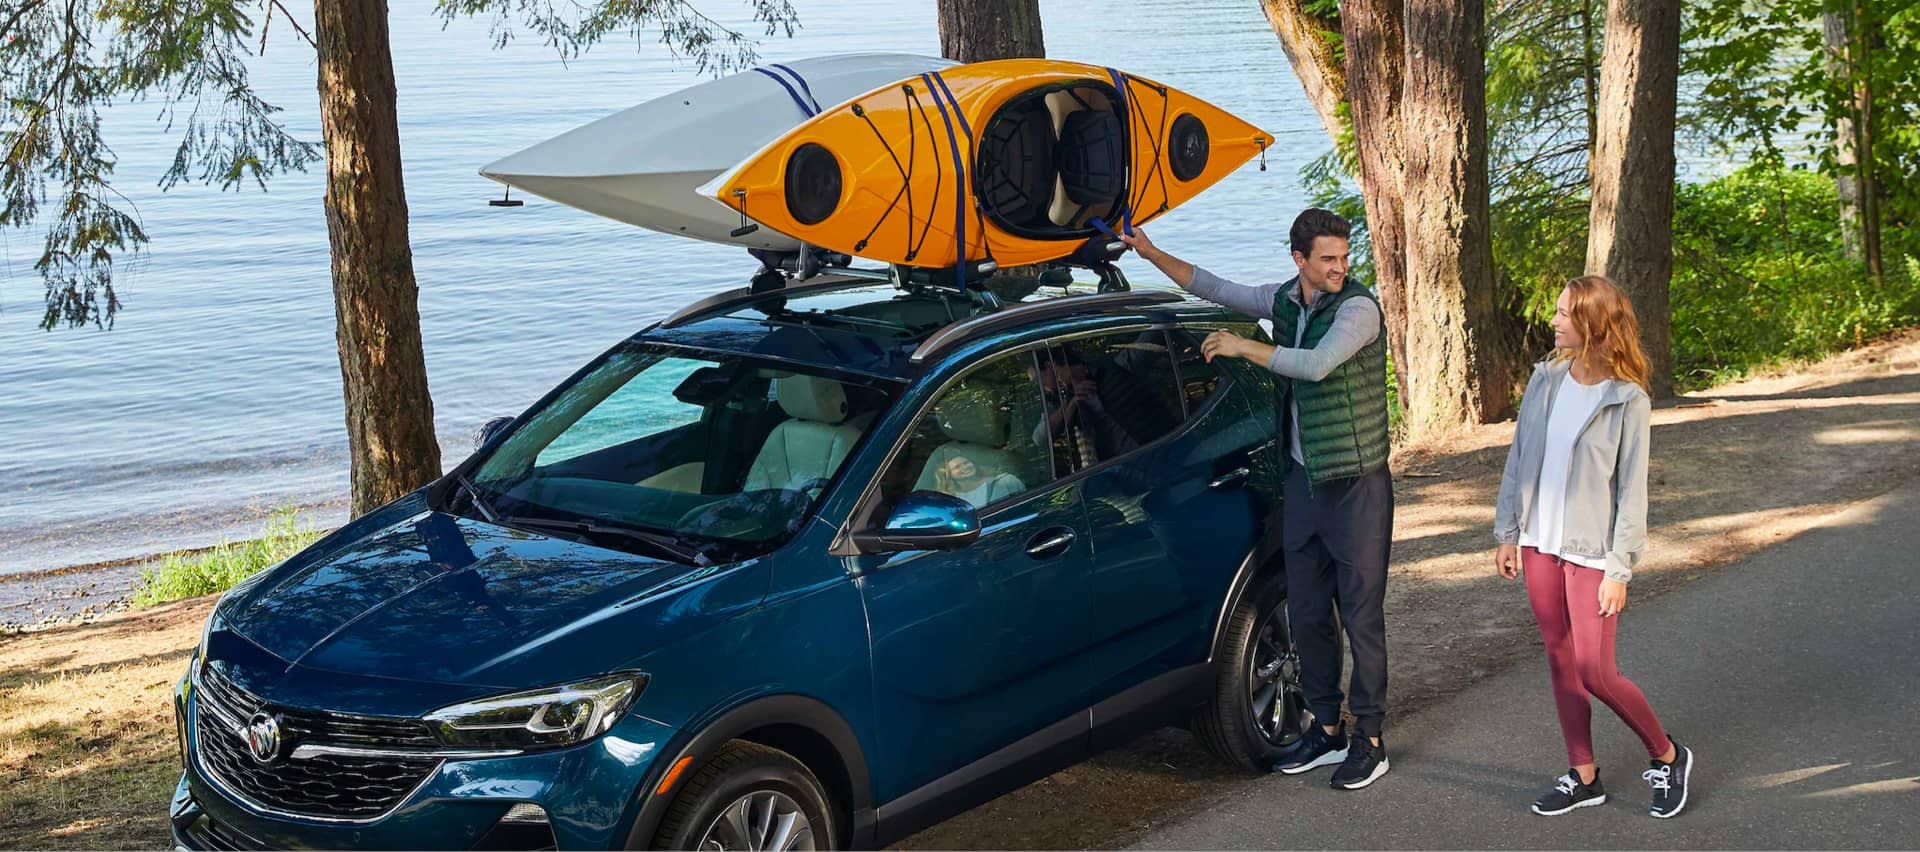 Buick vehicle with people putting kayaks on top